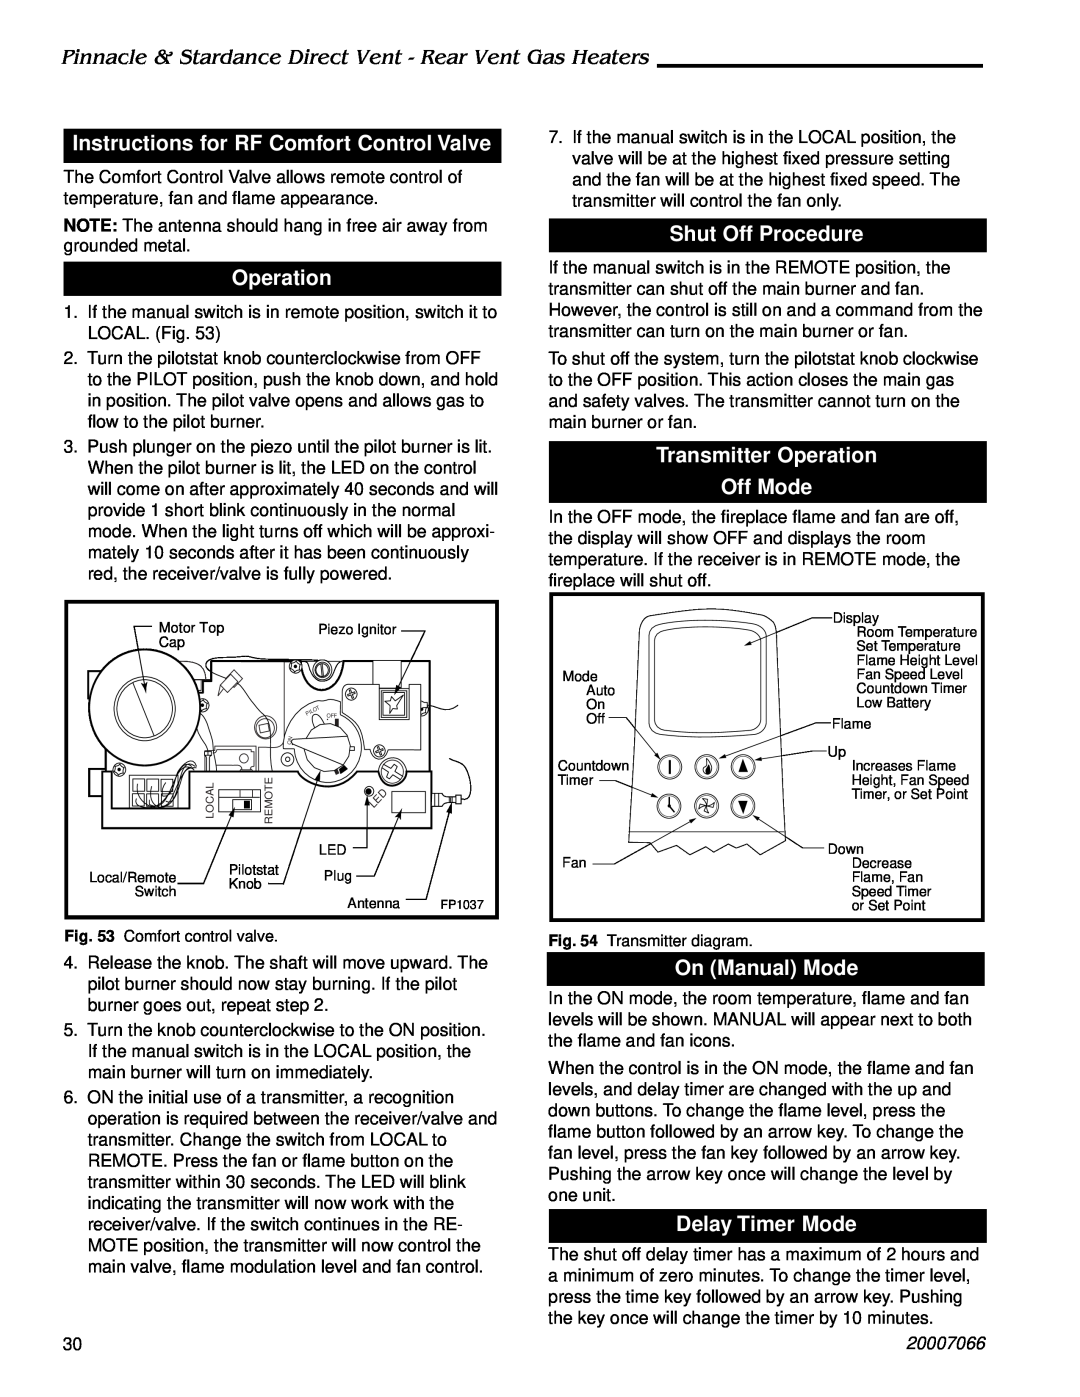 Vermont Casting 4070 Instructions for RF Comfort Control Valve, Operation, Shut Off Procedure, On Manual Mode, 20007066 